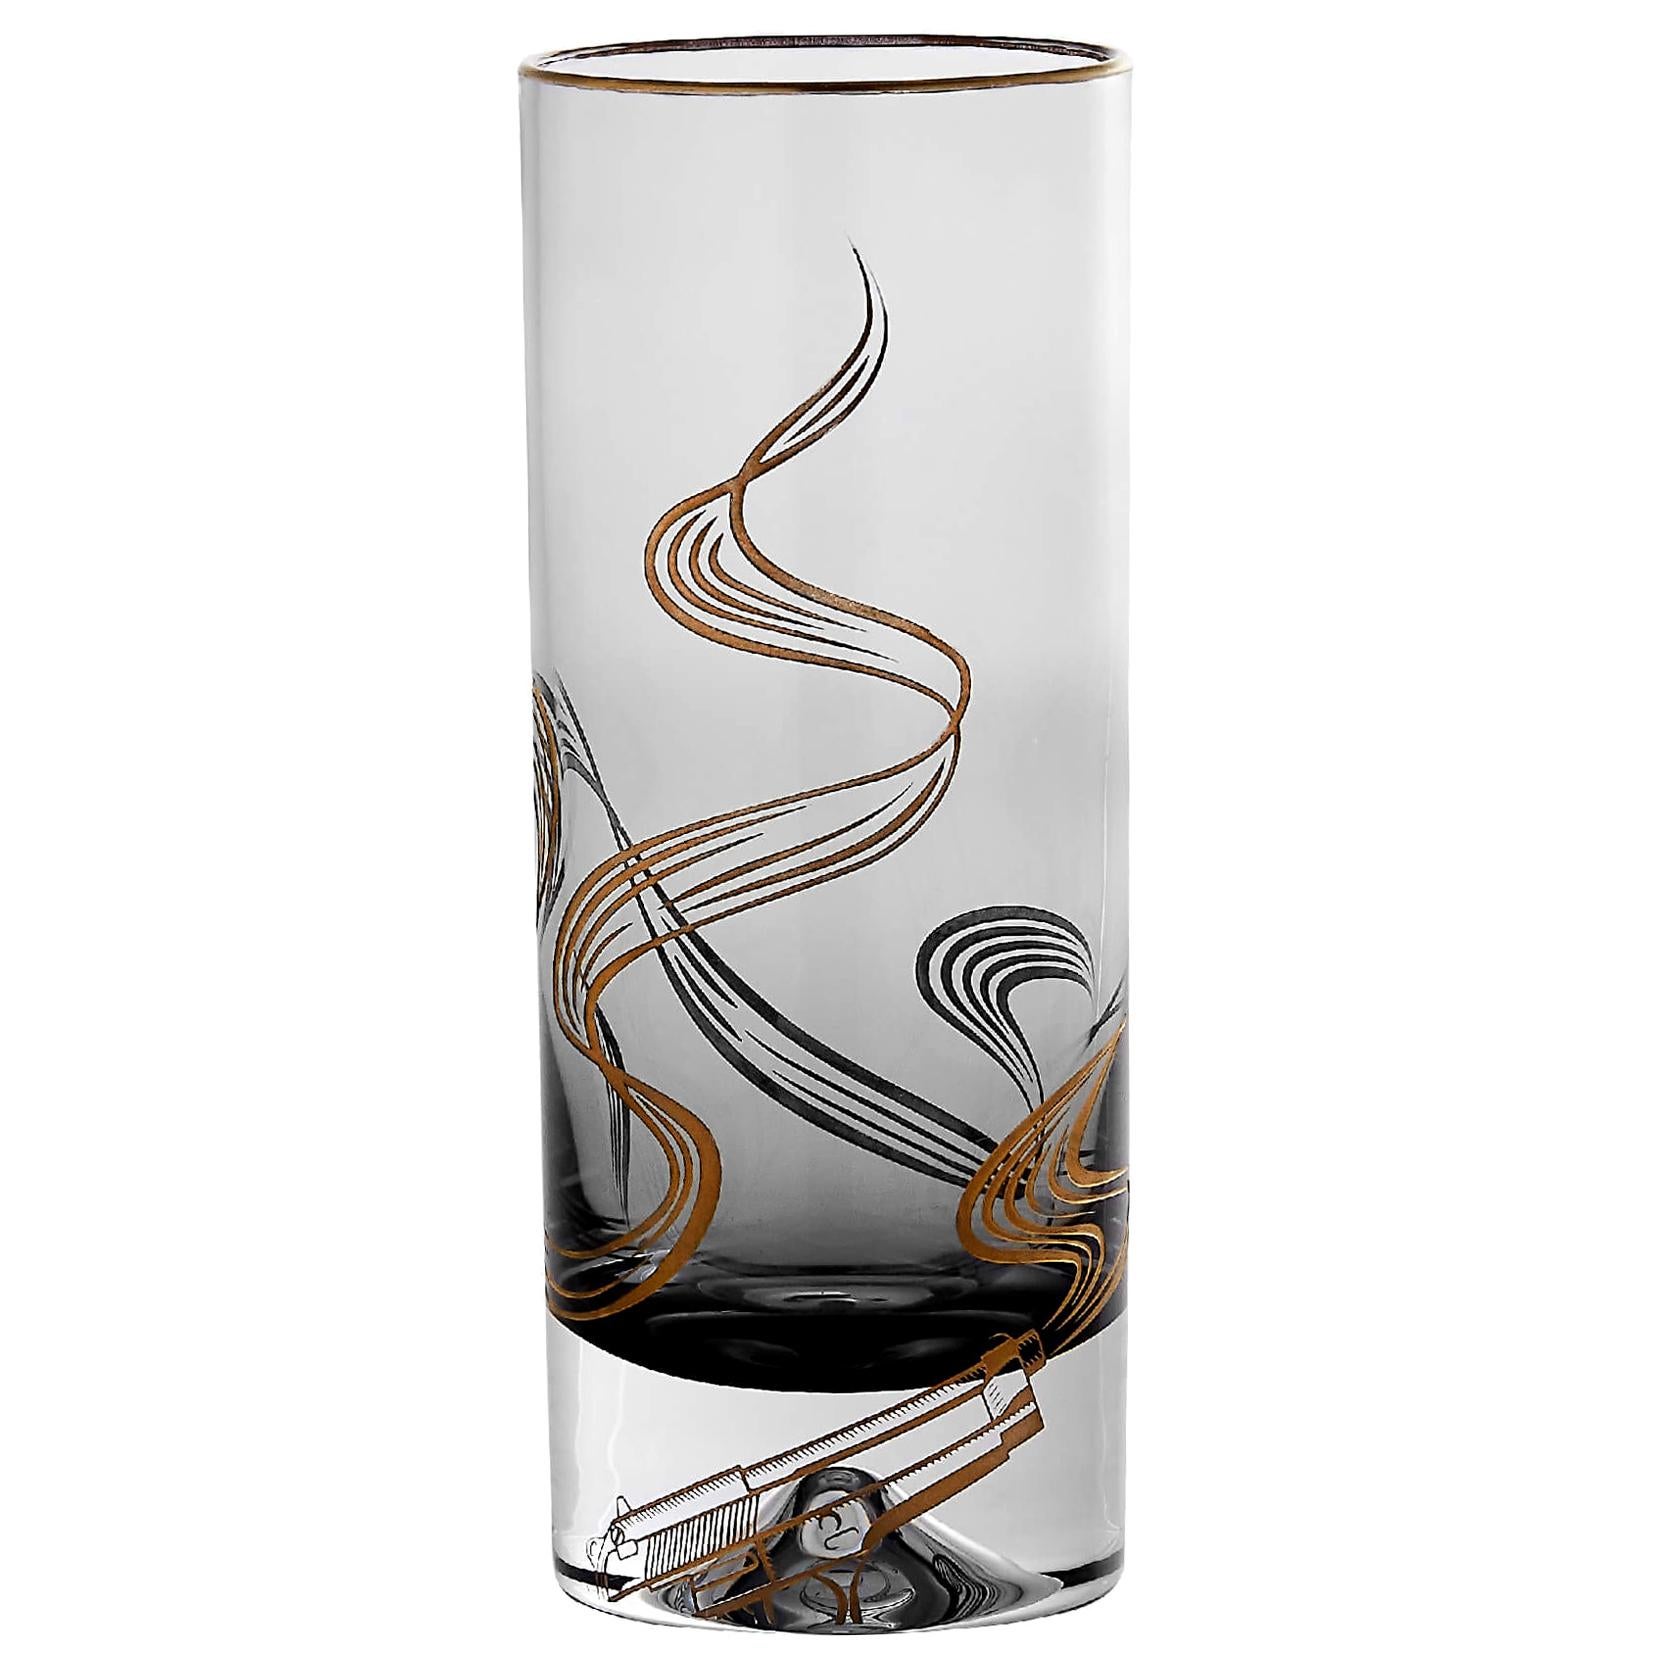 Stephen Webster Russian Roulette Gold Smoking Gun Highball Glass - Set of 2 For Sale